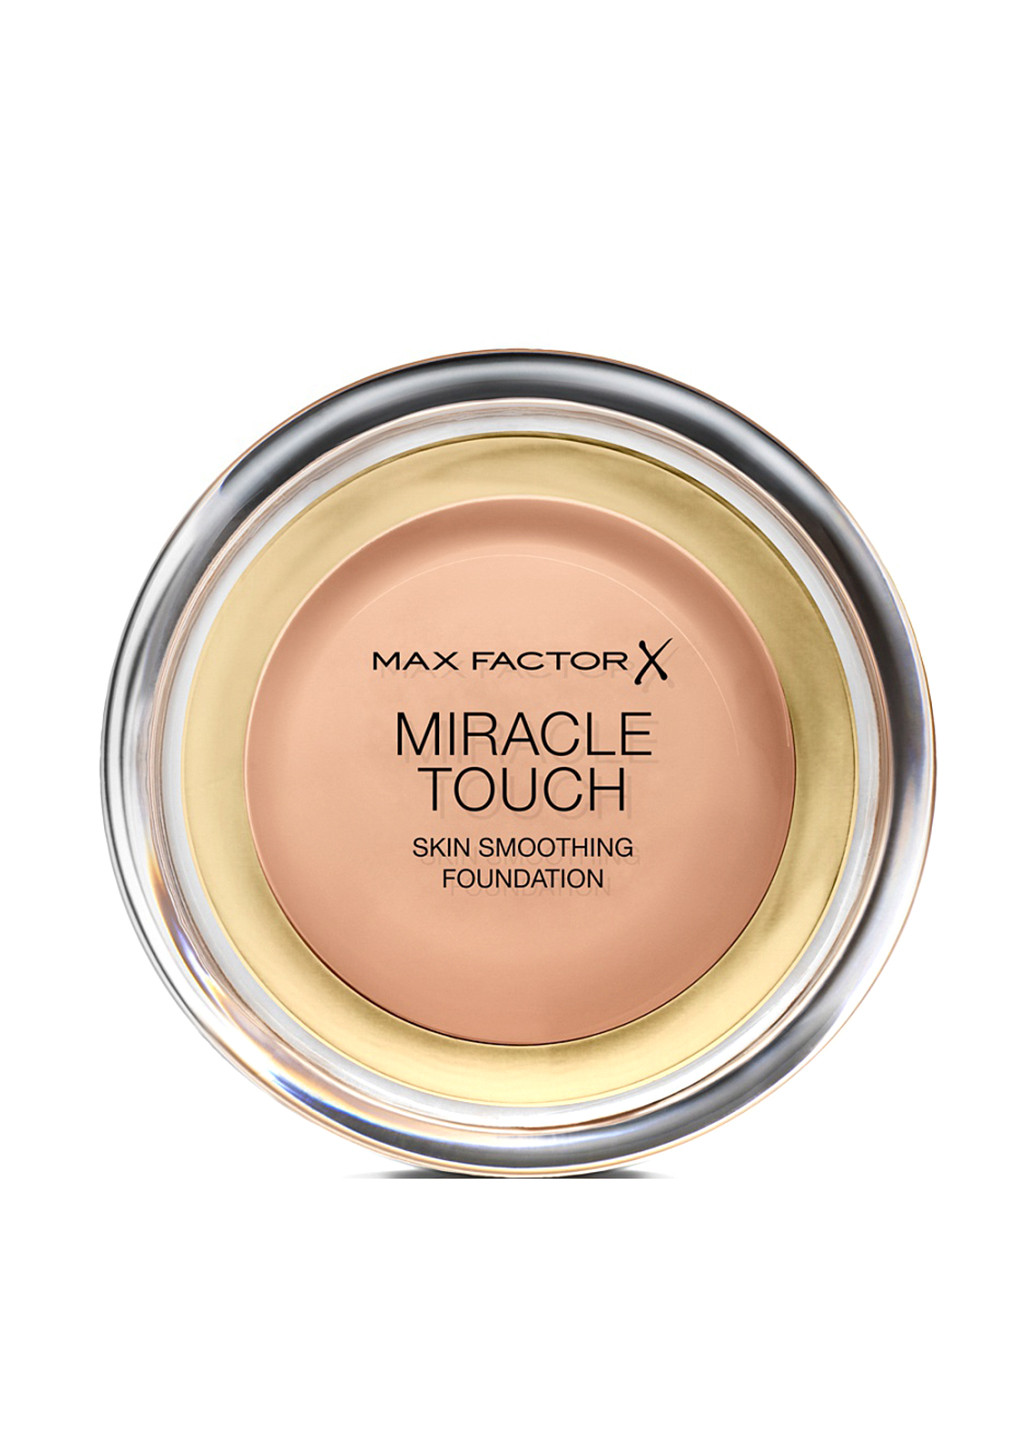 Тональная основа Miracle Touch №70 (натурал), 11,5 г Max Factor (27902030)